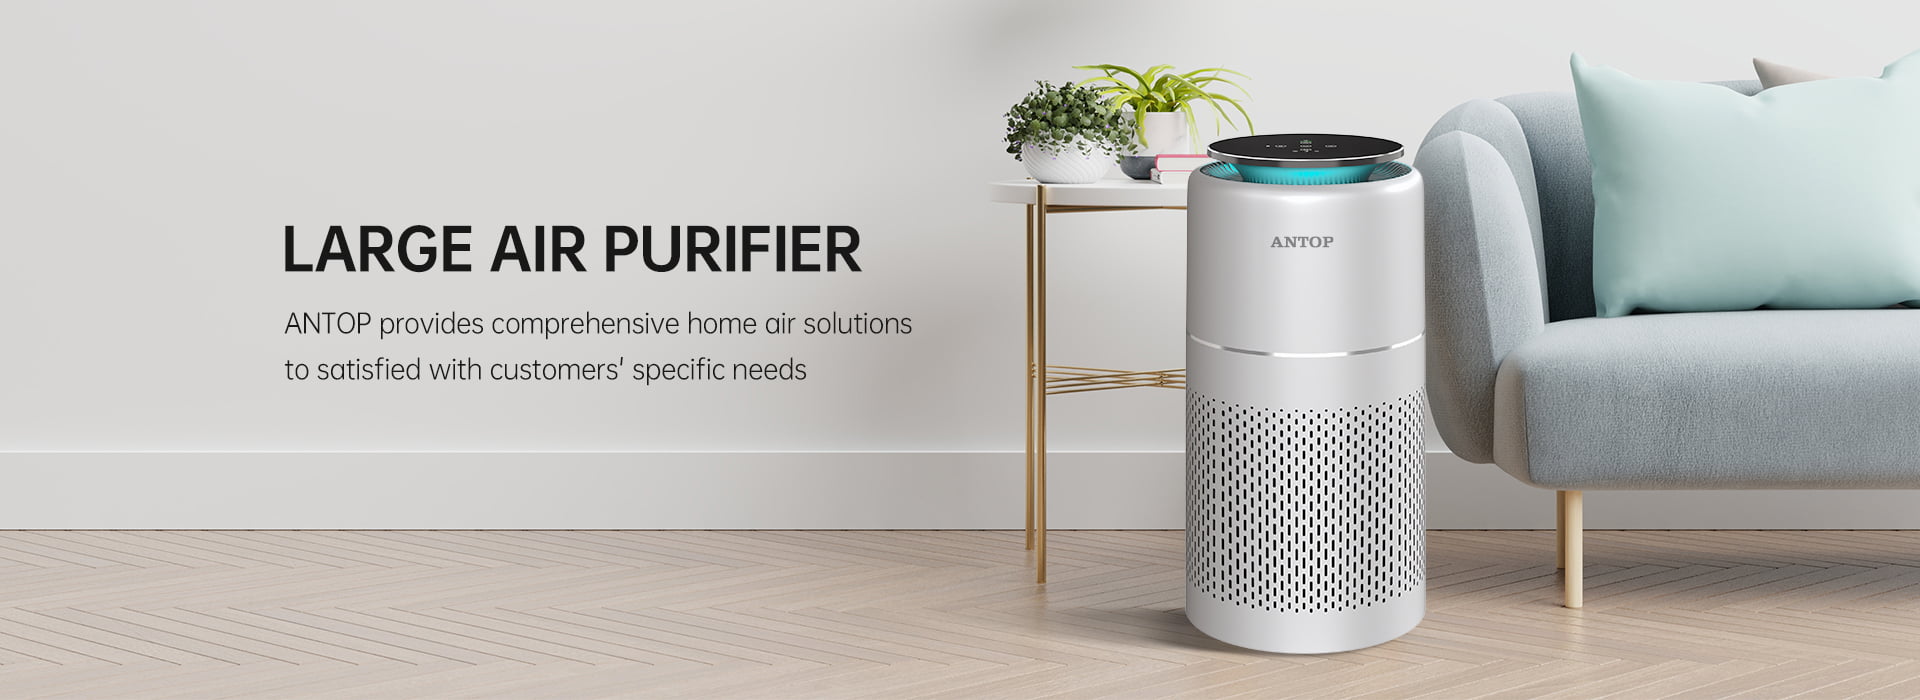 Large Air Purifier Category